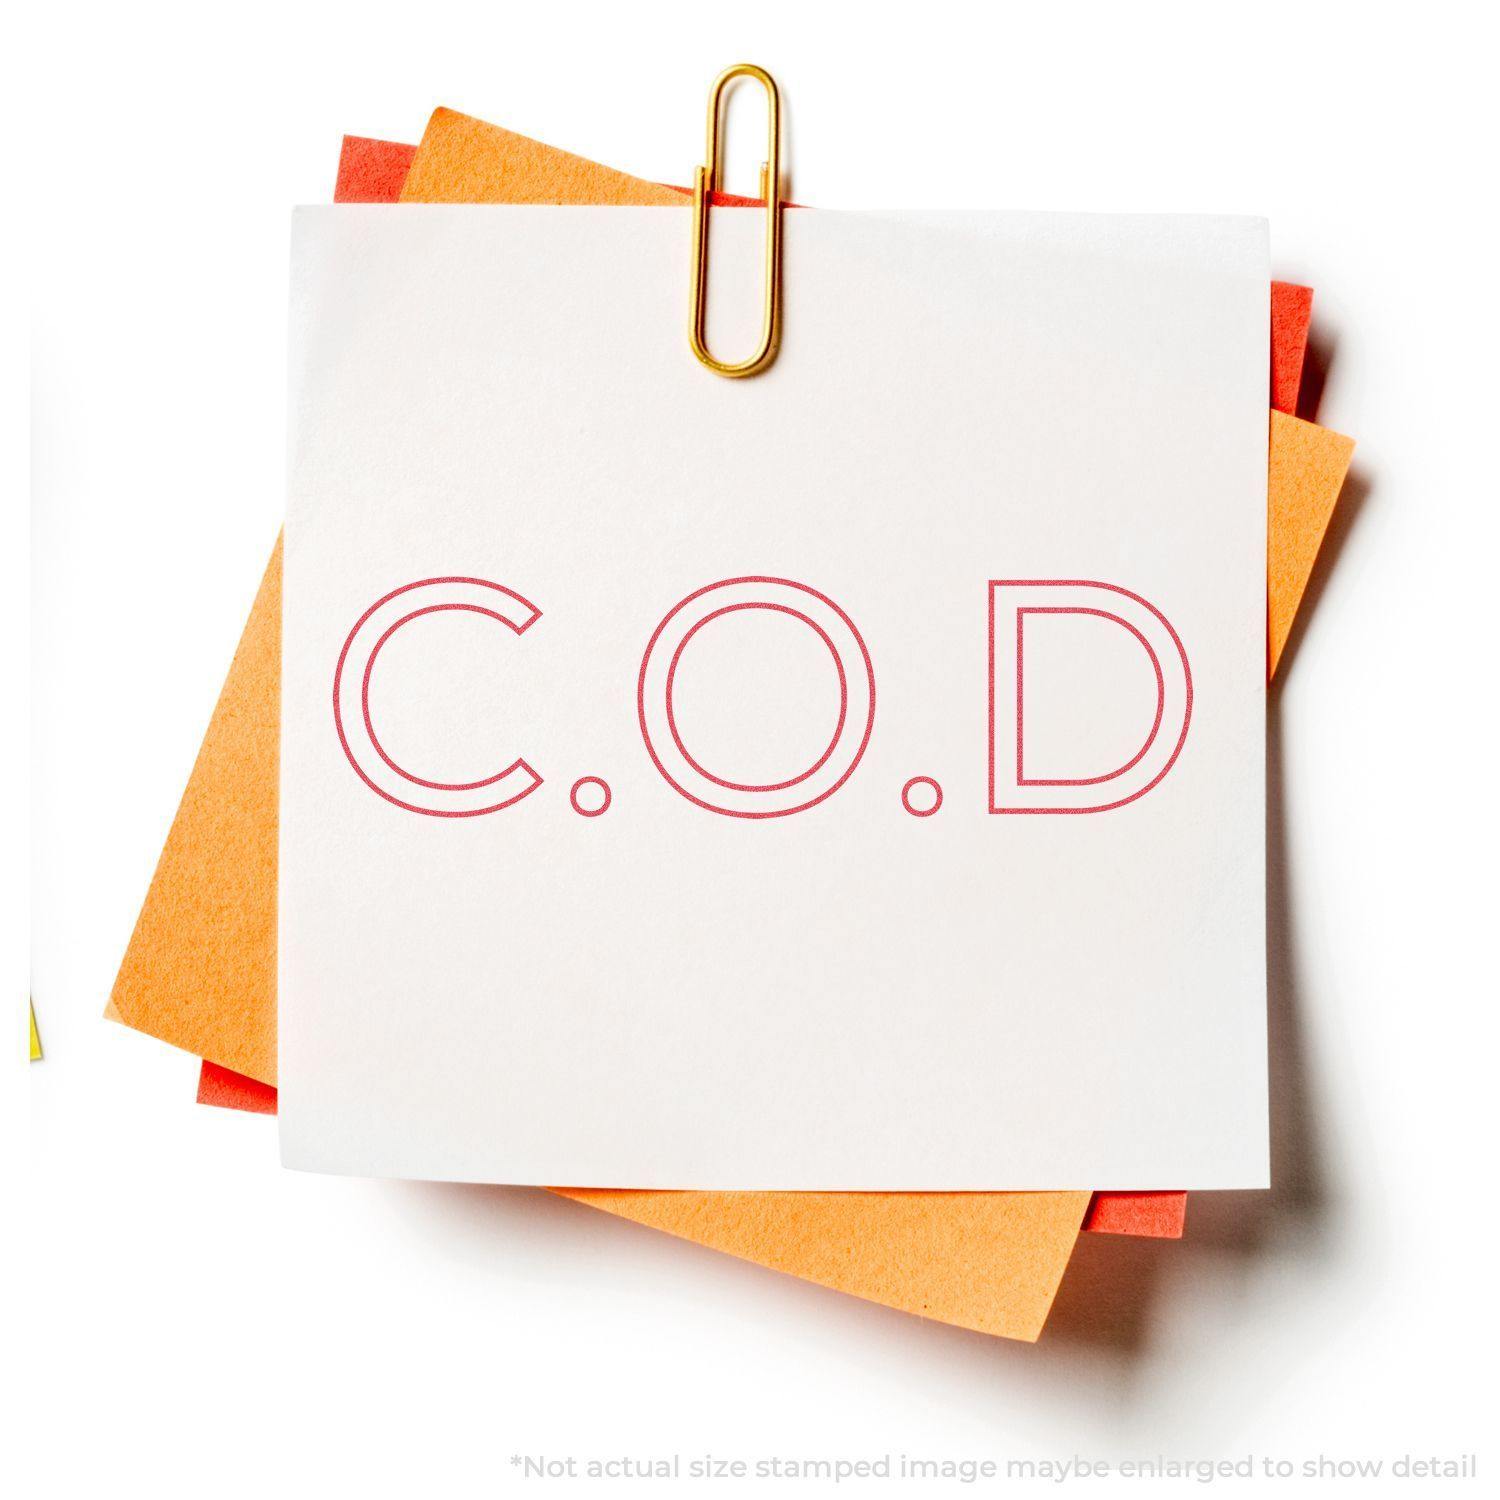 An xstamper stamp with a stamped image showing how the text "C.O.D" in an outline font is displayed after stamping.